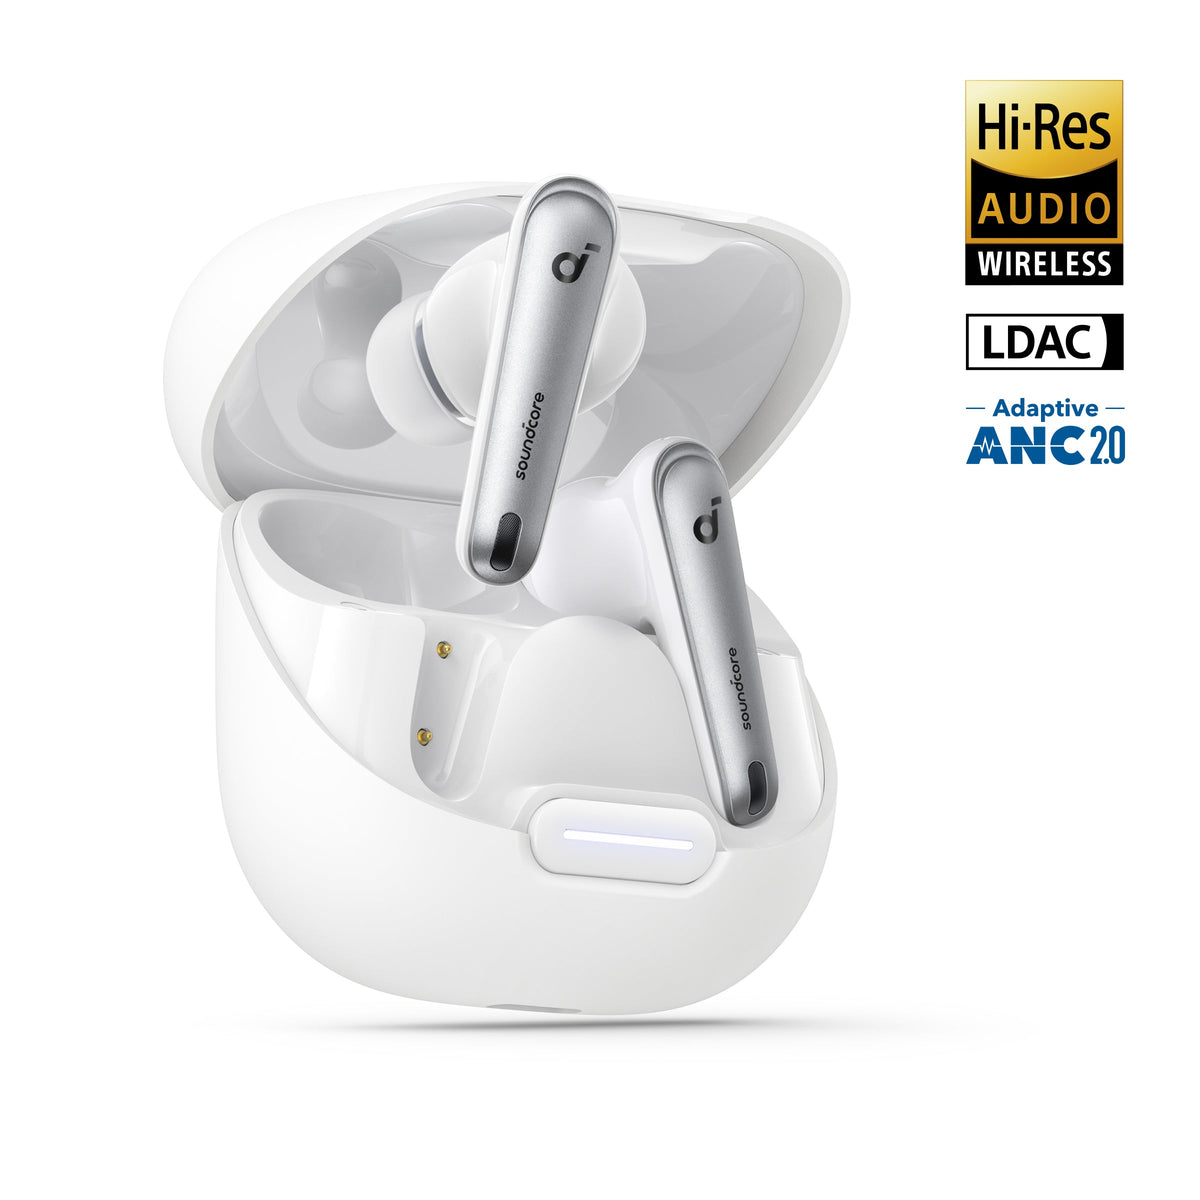 Liberty 4 NC - All-New True-Wireless Noise Canceling Earbuds - soundcore US  - soundcore Europe